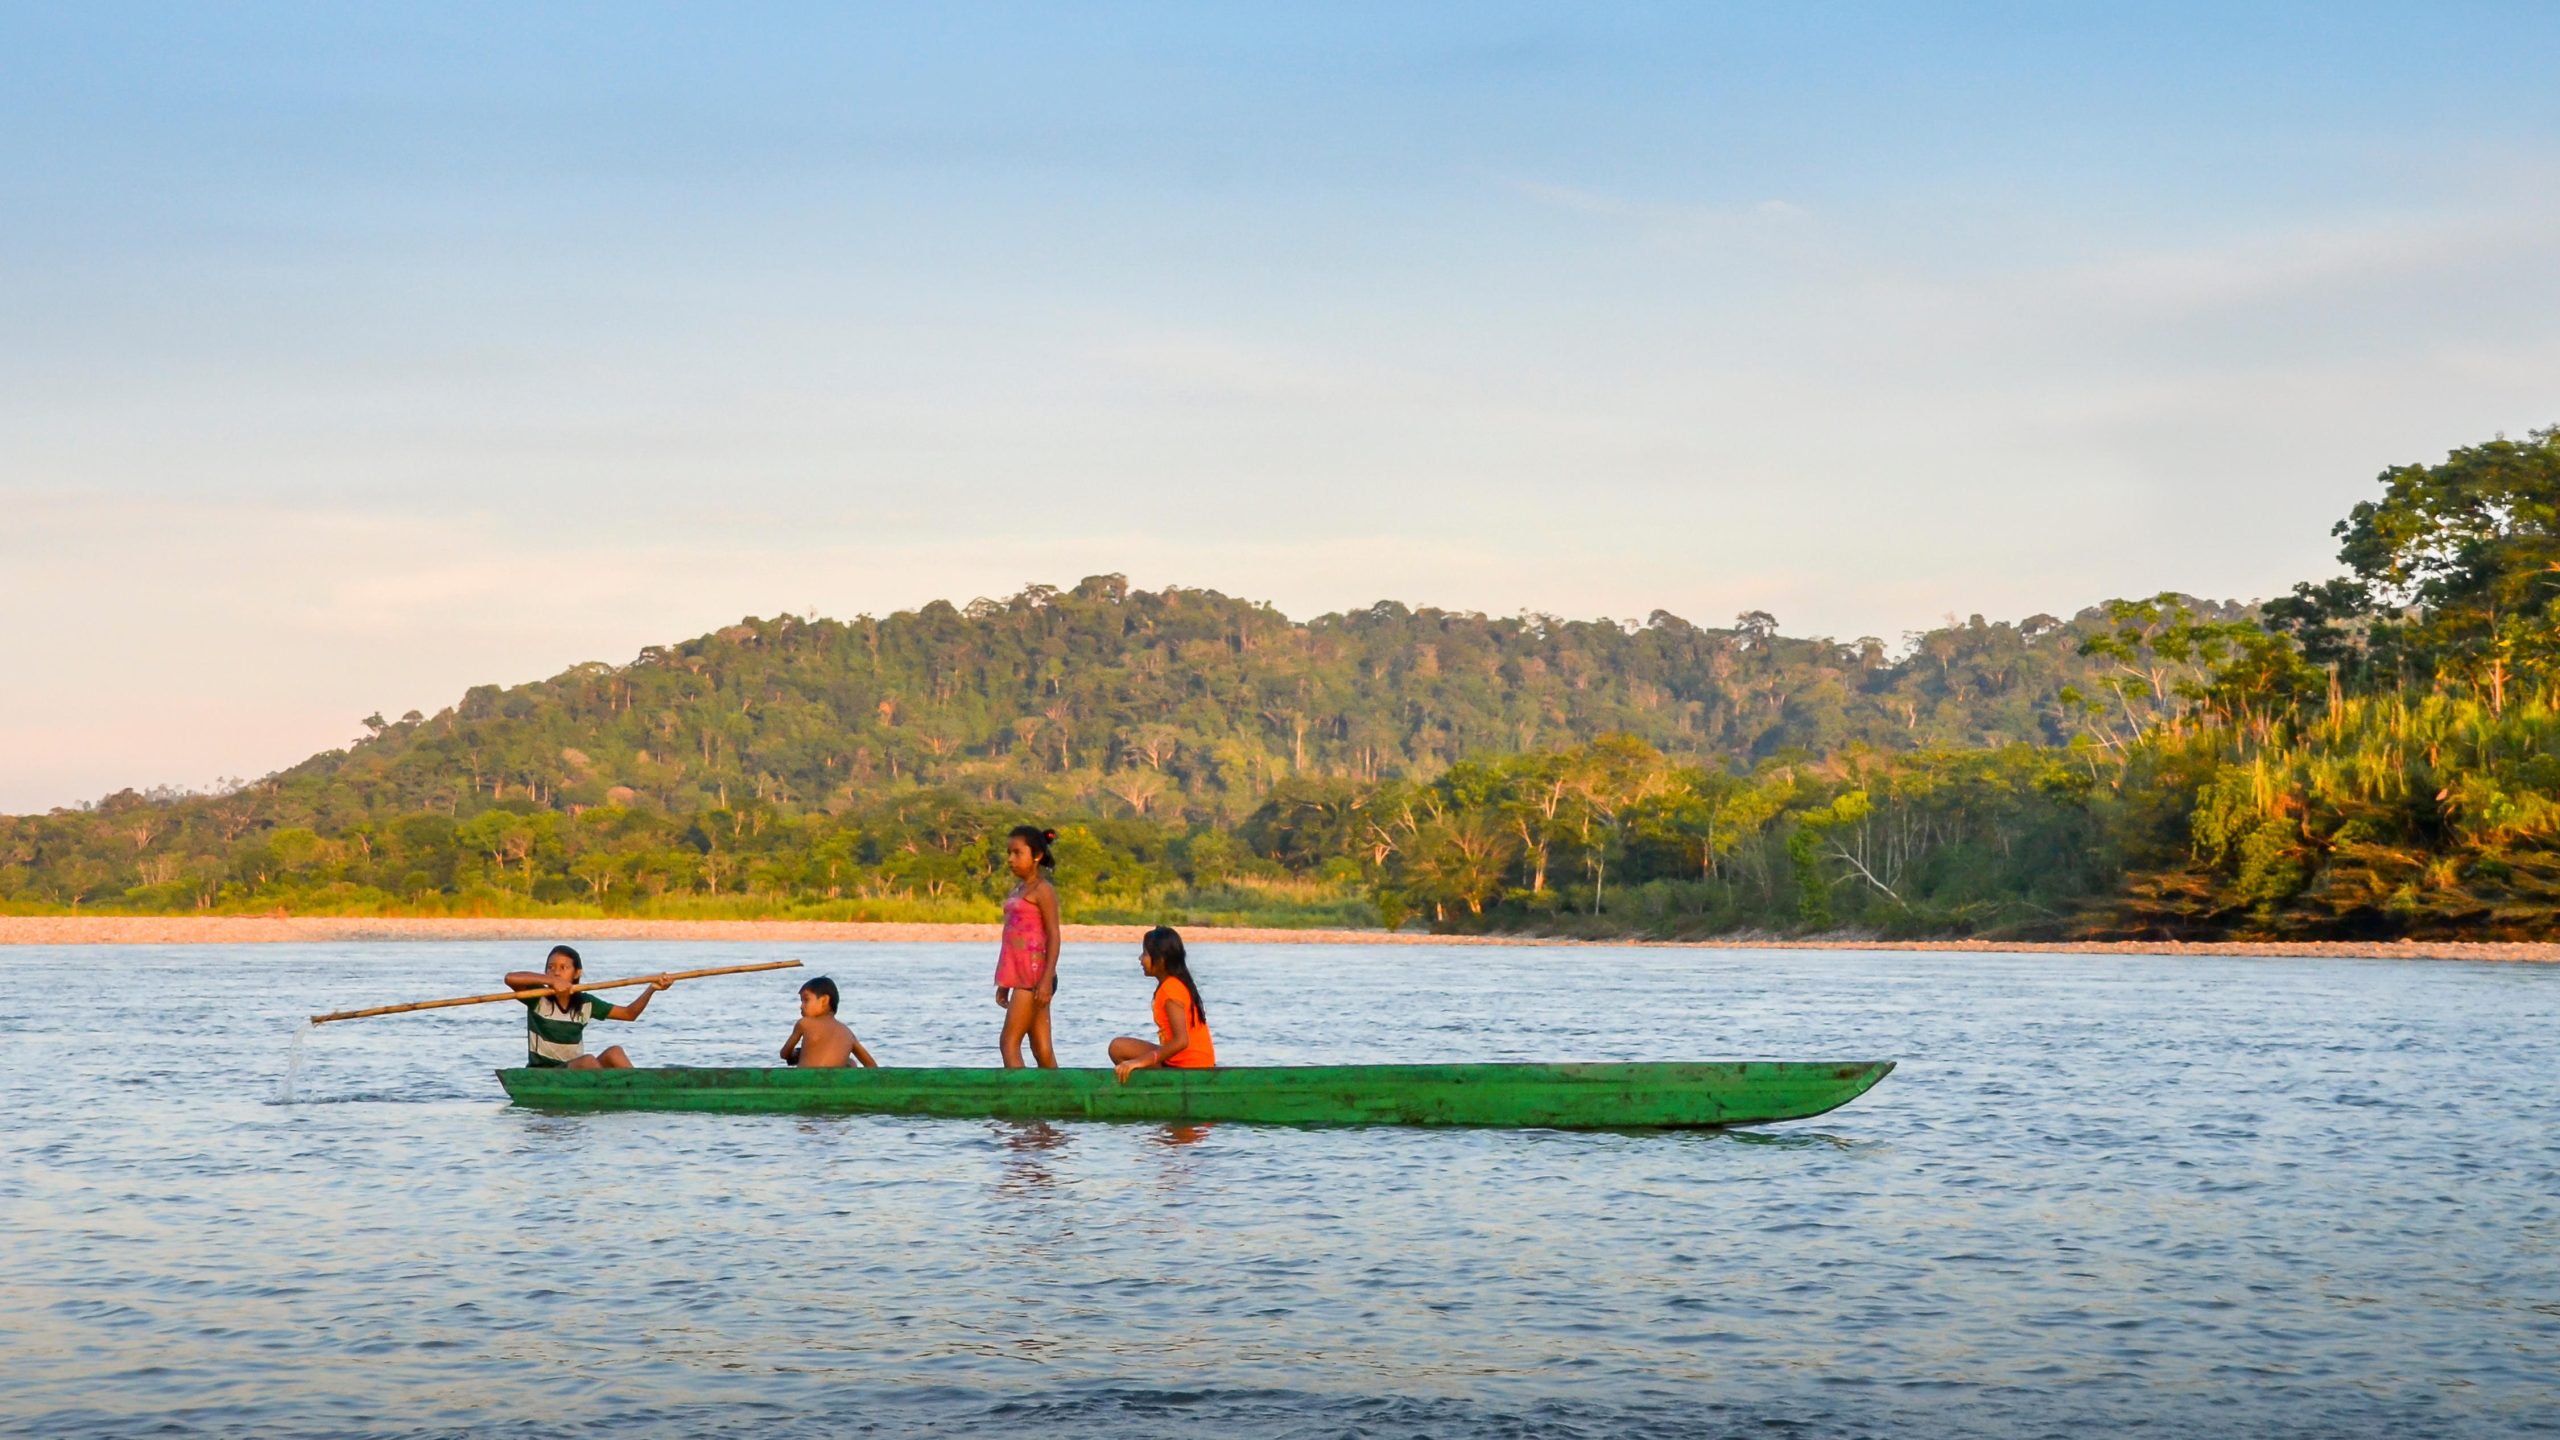 <p>Quechua teenagers on the Napo River in Ecuador. The Ecuadorian Amazon represents 2% of the biome&#8217;s surface area and concentrates 18% of the hydroelectric dams, which change the natural water dynamics (Image: Alexandre Rotenberg / Alamy).</p>